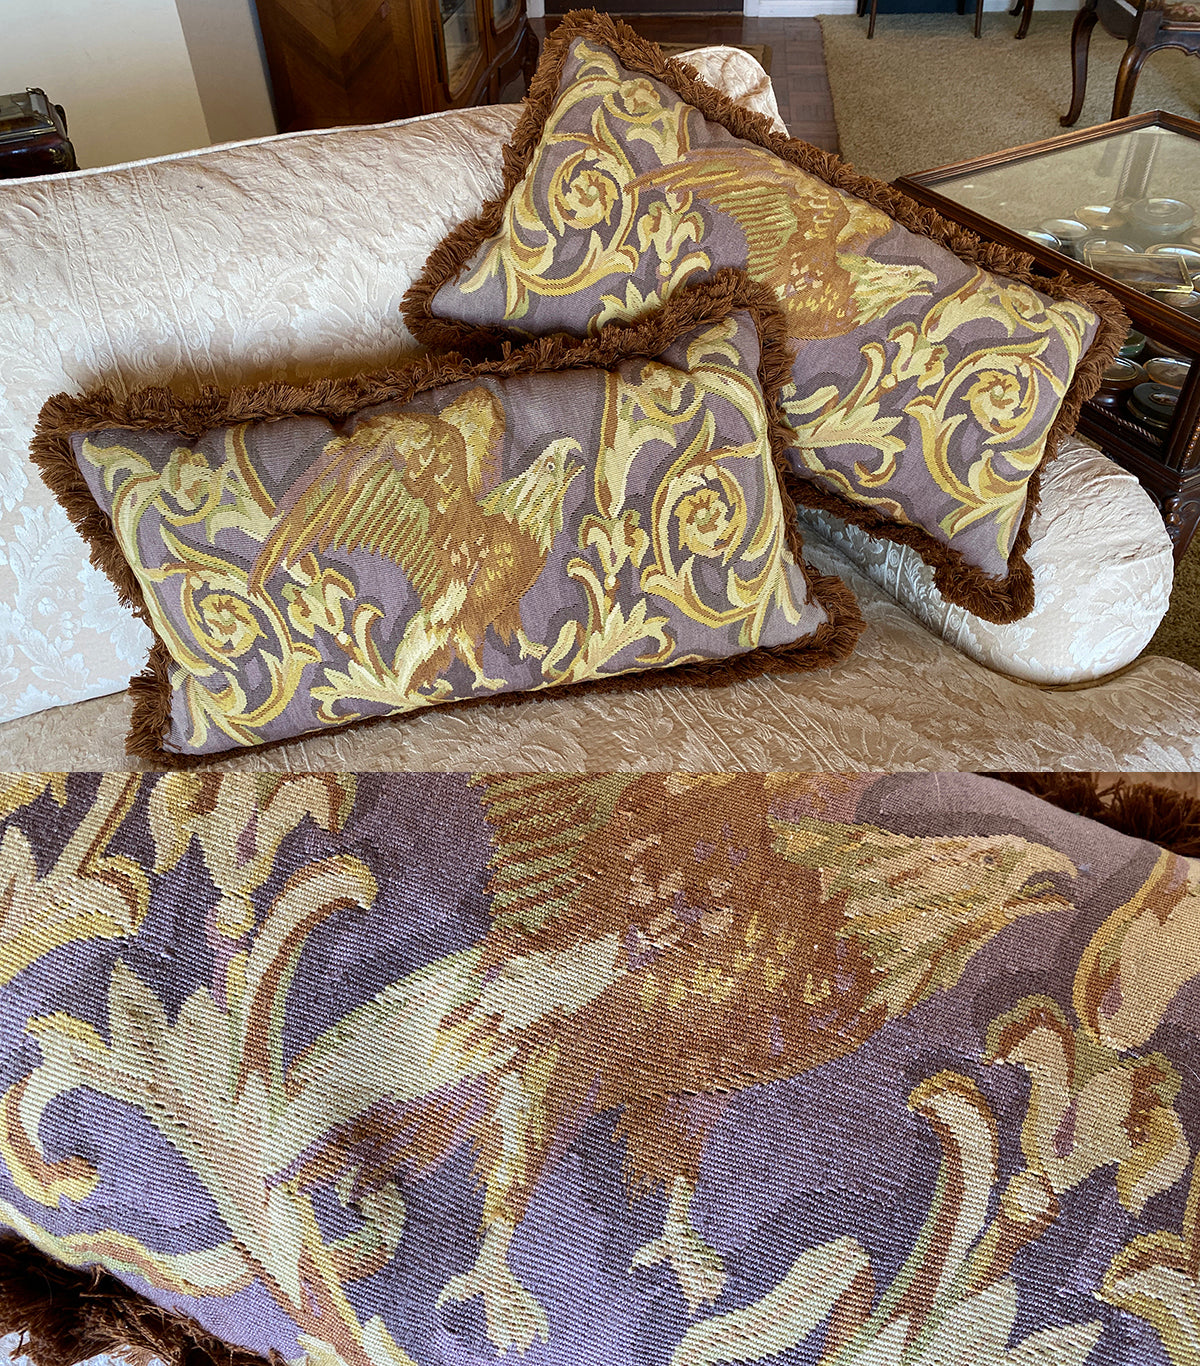 PAIR (2) Vintage Woven Wool Decorator Throw Pillows, French Aubusson Look, Eagle